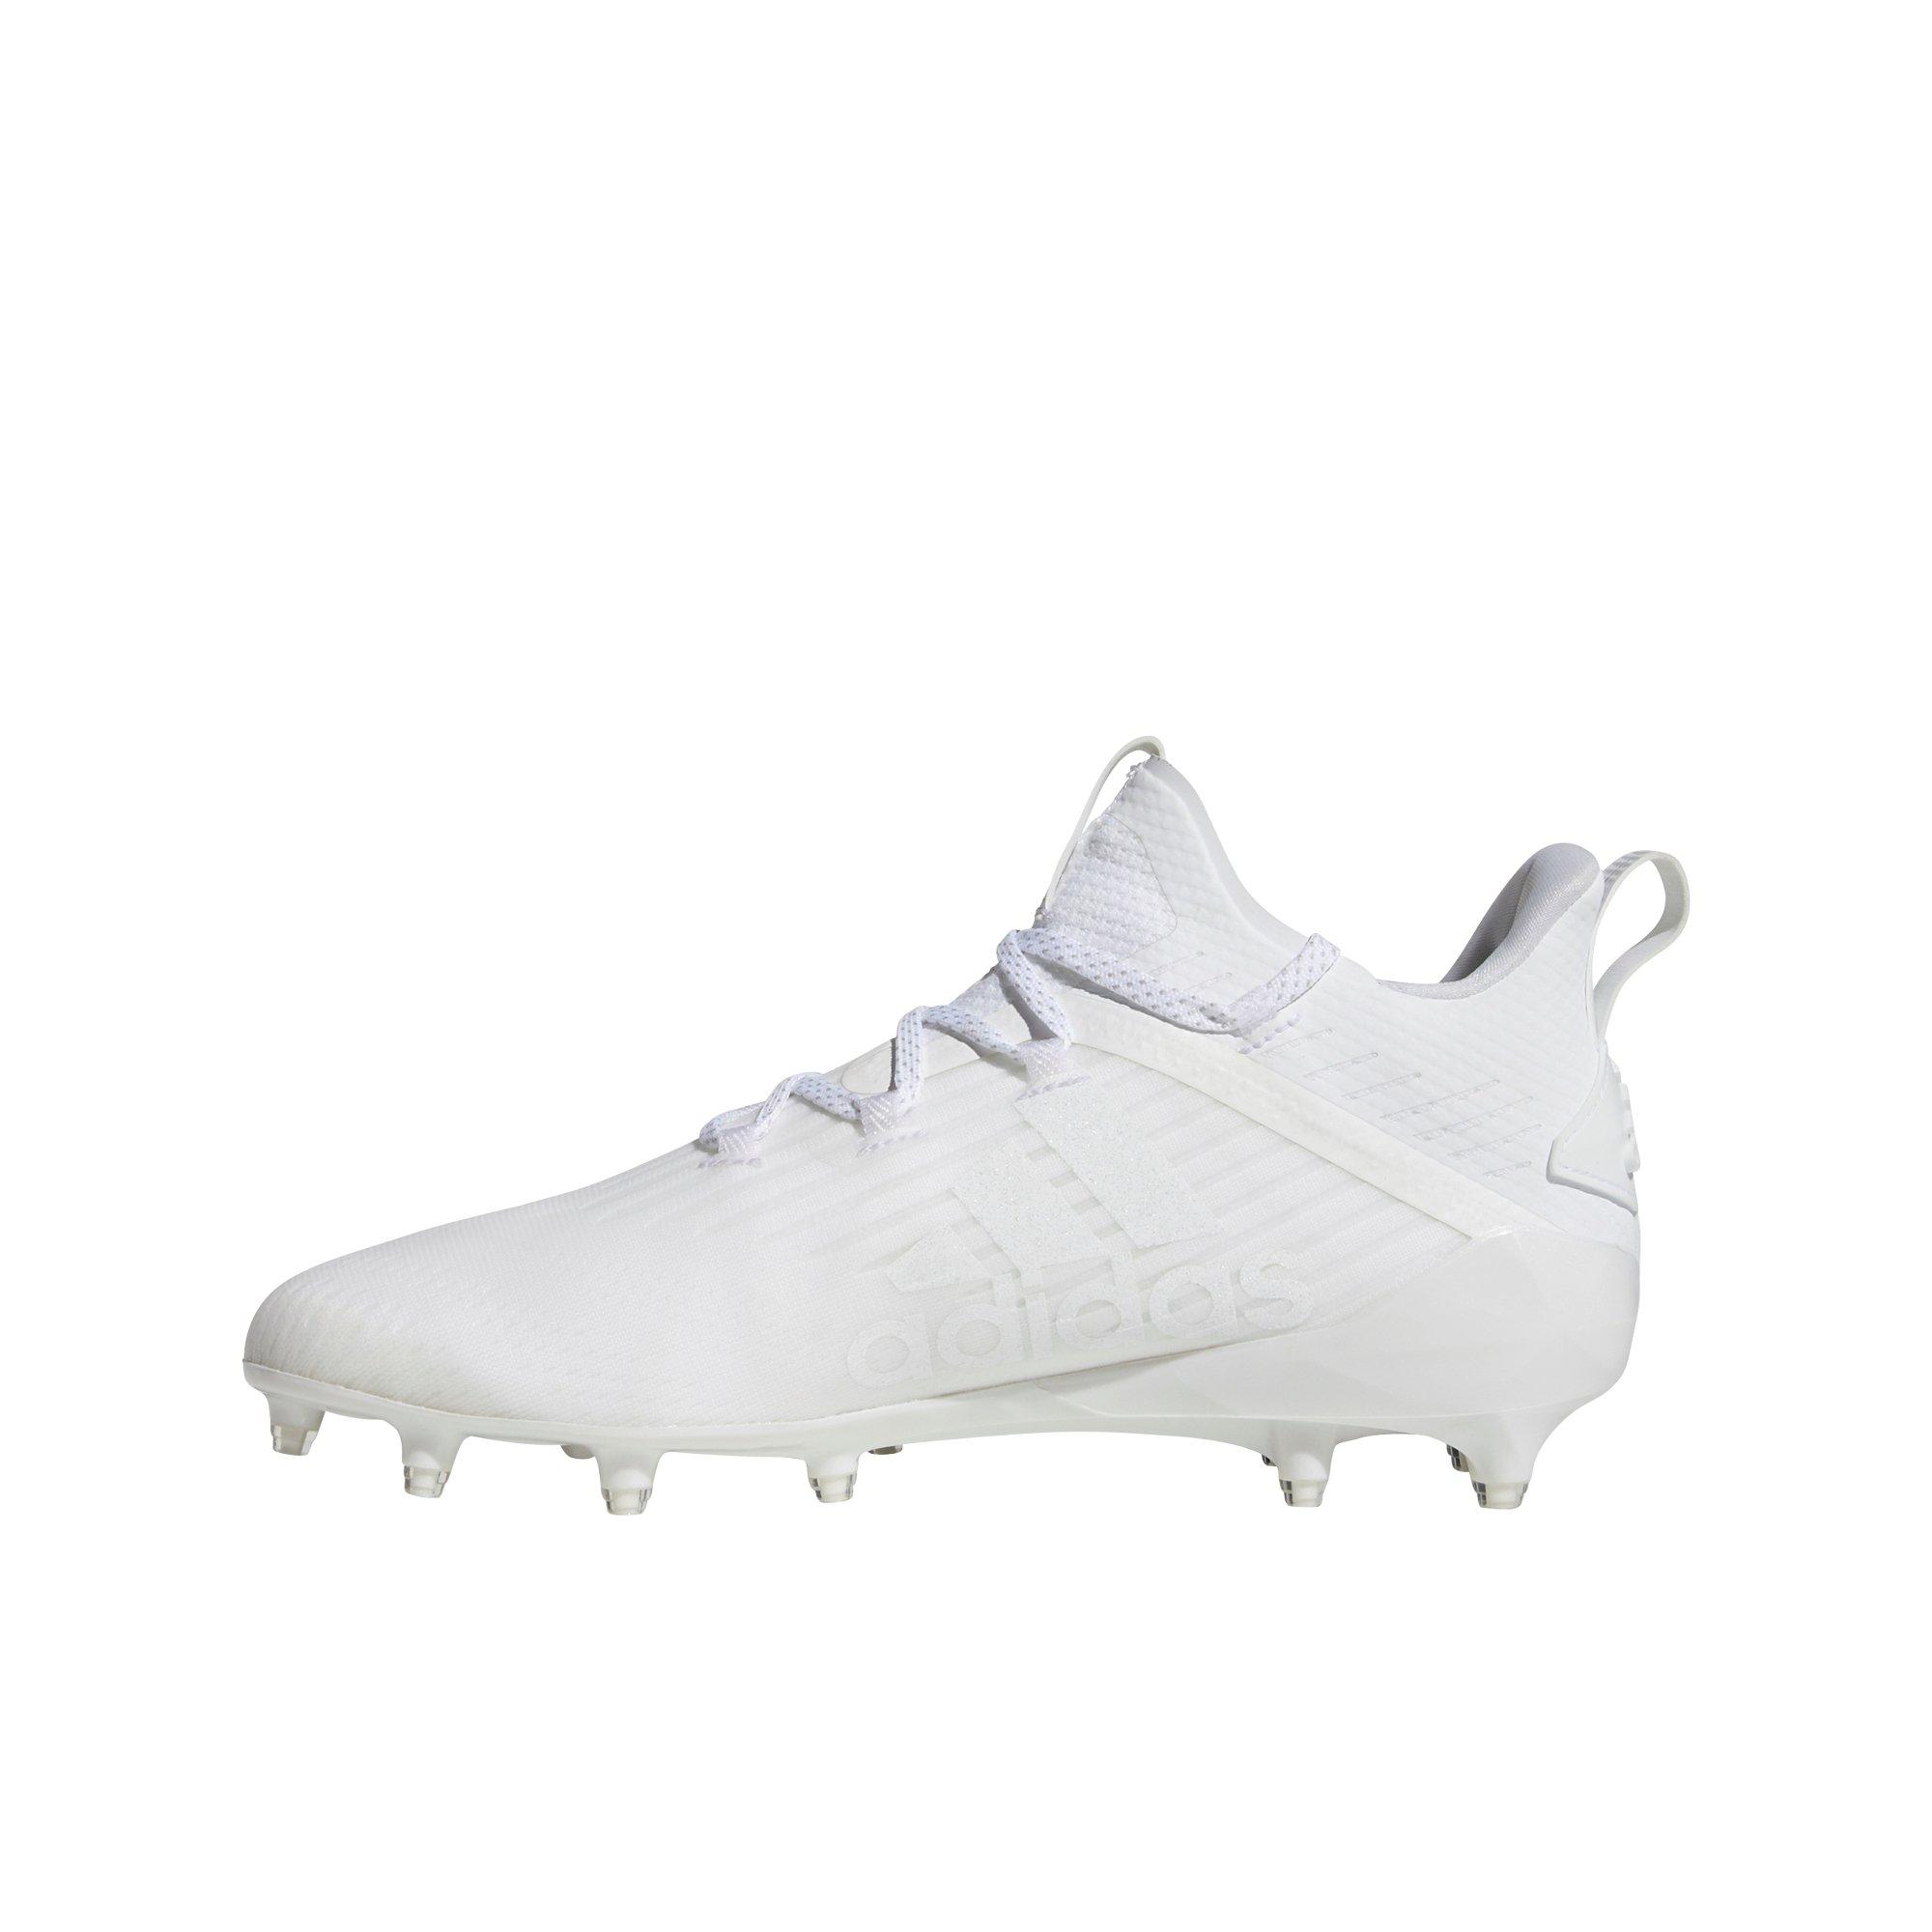 size 8.5 football cleats